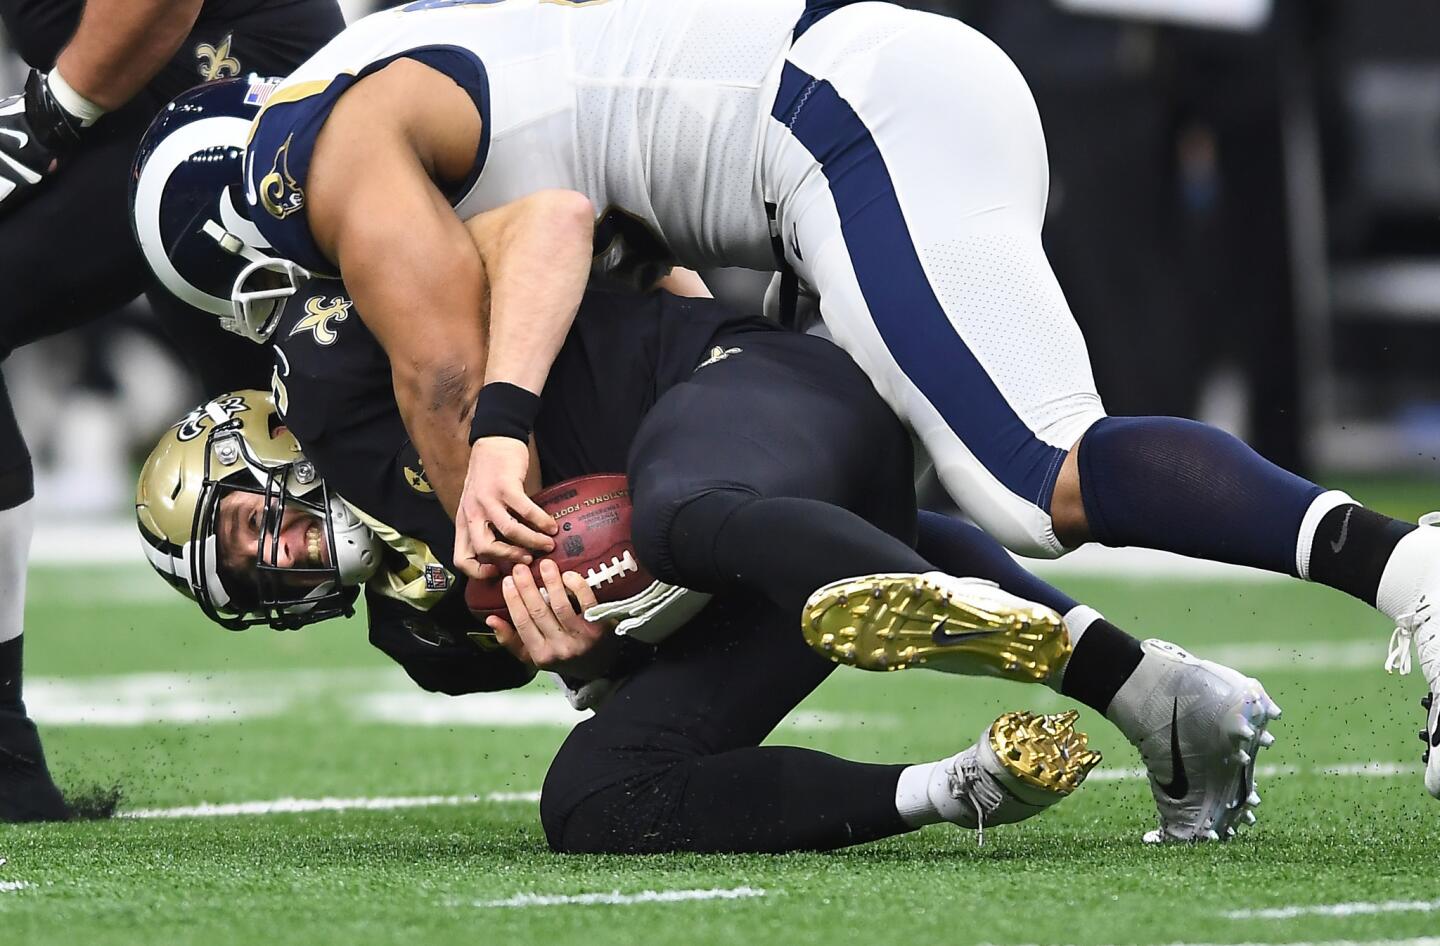 Rams defensive lineman Ndamukong Suh sacks Saints quarterback Drew Brees in the second quarter in the NFC Championship at the Superdome on Jan. 20.